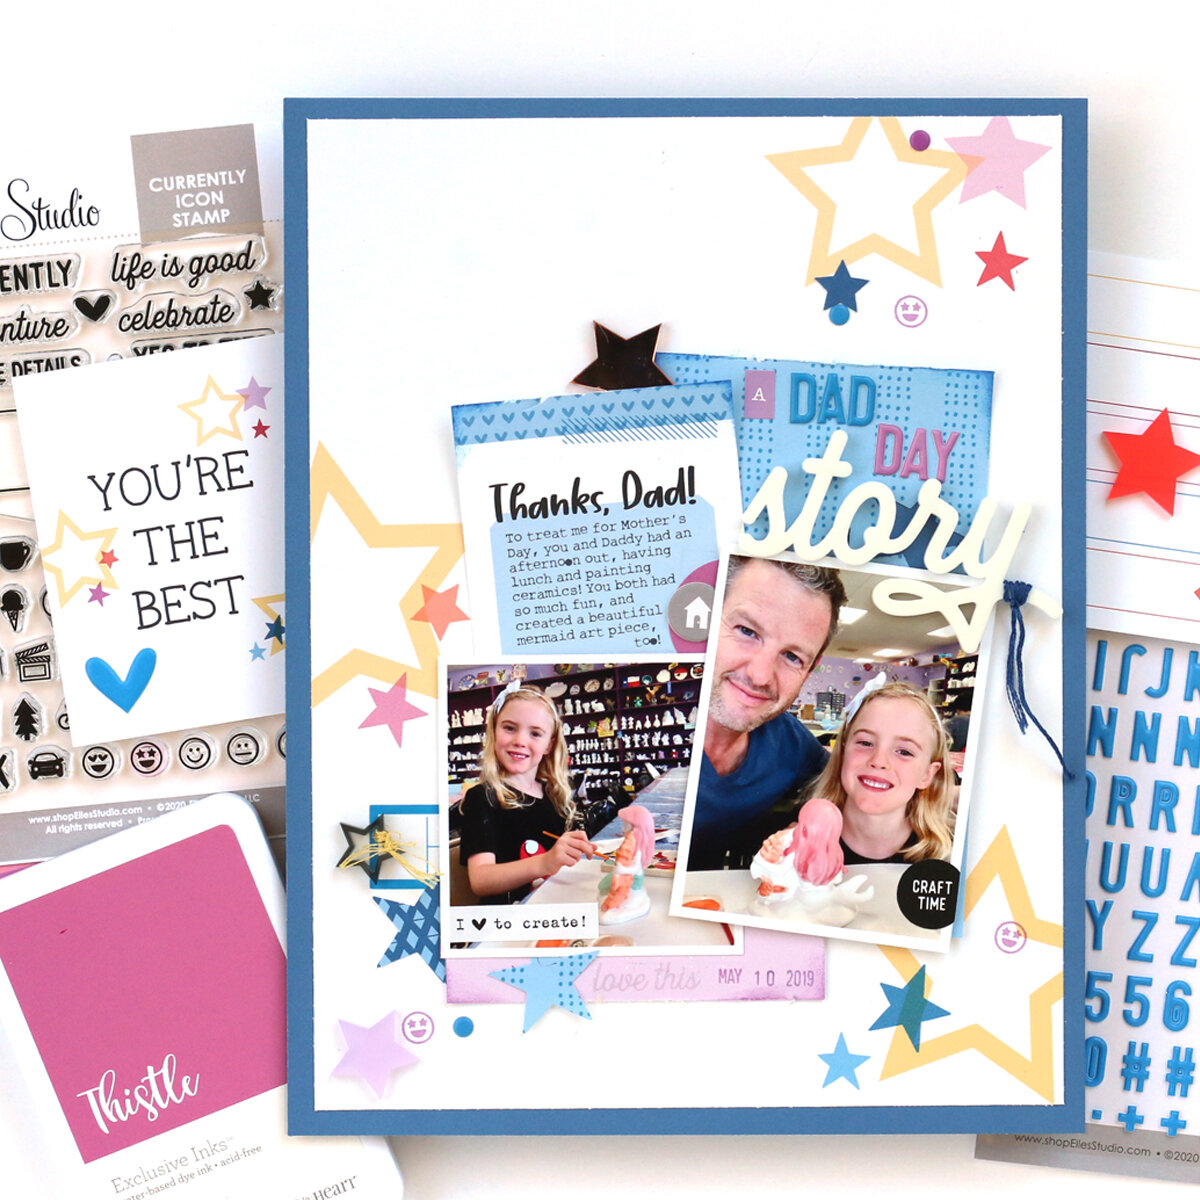 Elle's Studio - Scrapbooking paper, cards, stamps, and more!